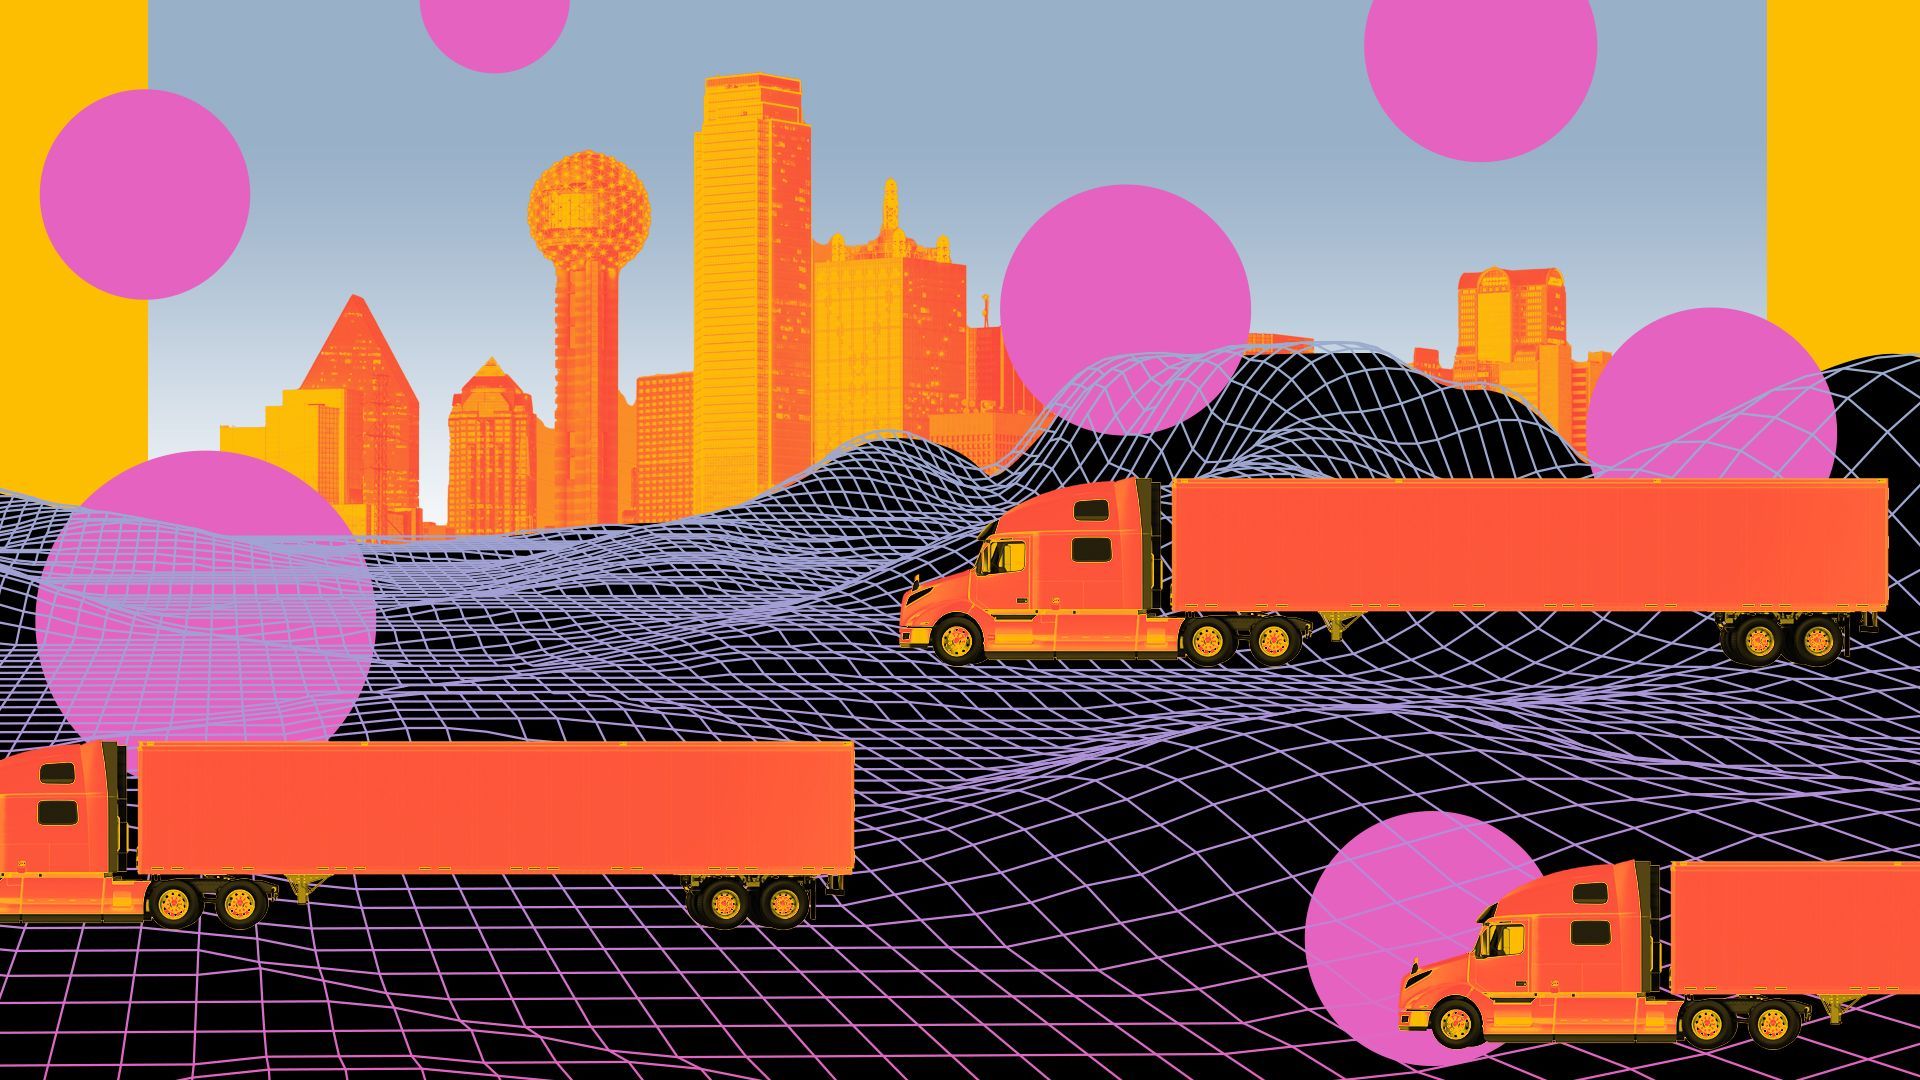 Illustration of the Dallas skyline with tractor trailer trucks and various shapes in the foreground